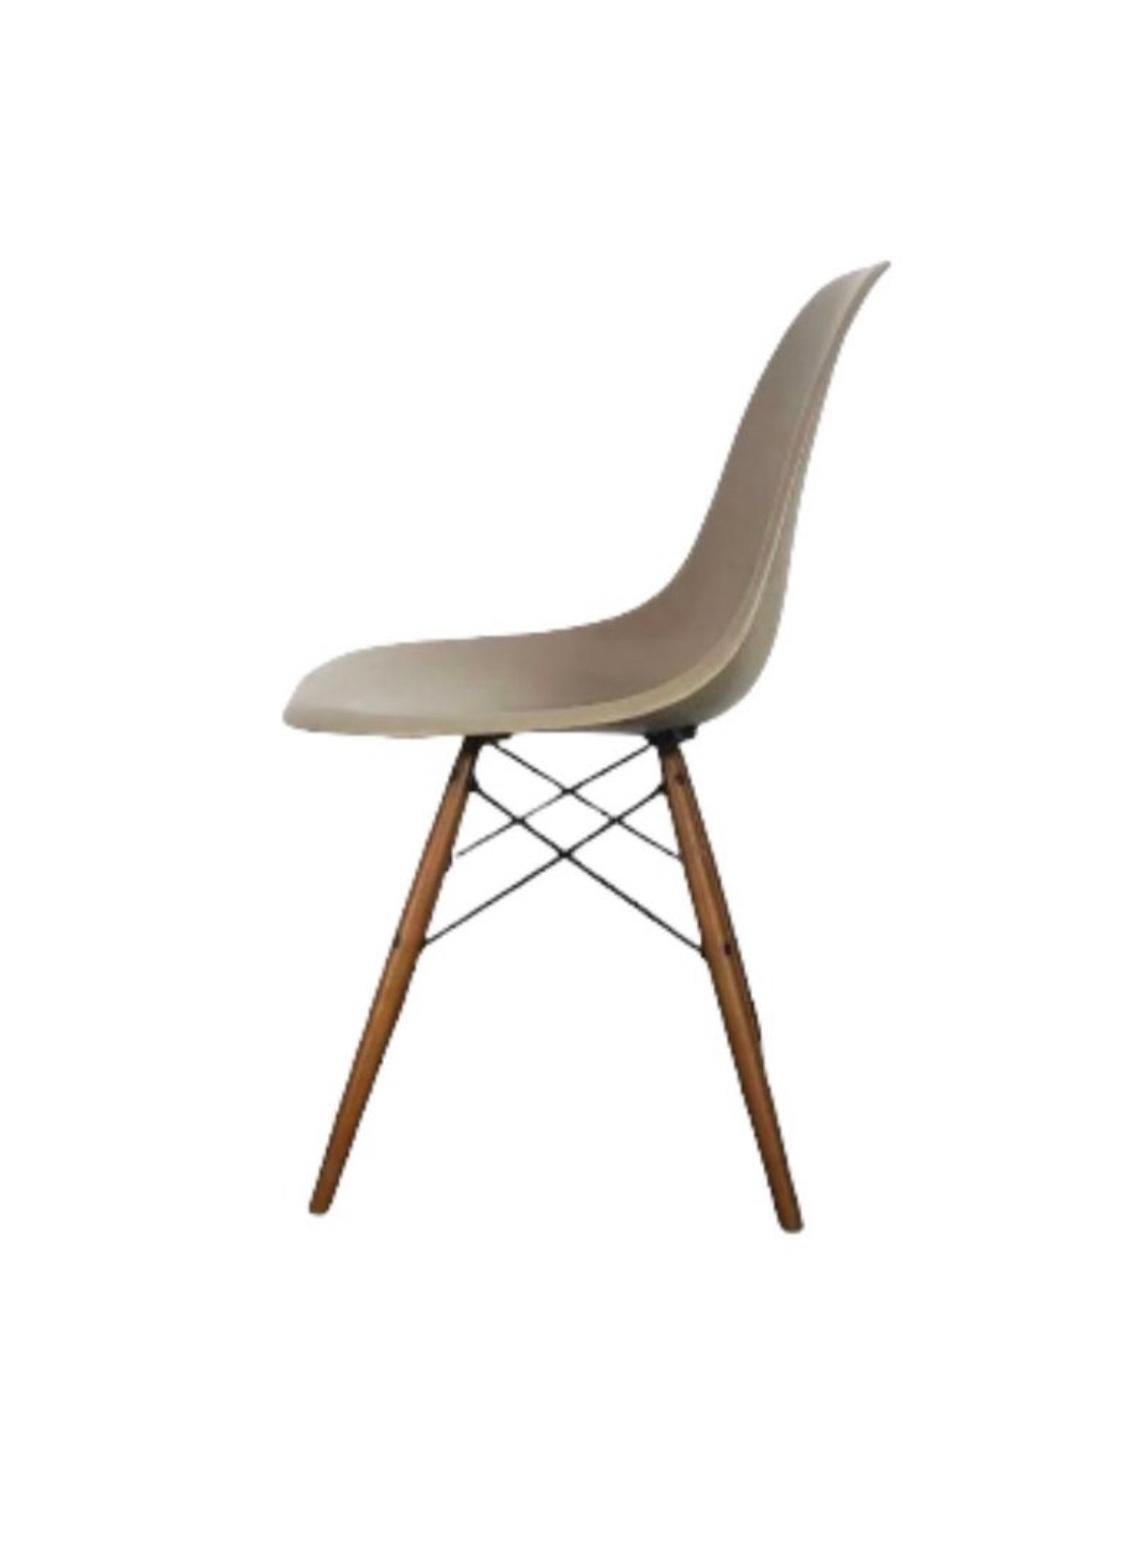 American Eames Fiberglass Shell Dining Chairs by Herman Miller